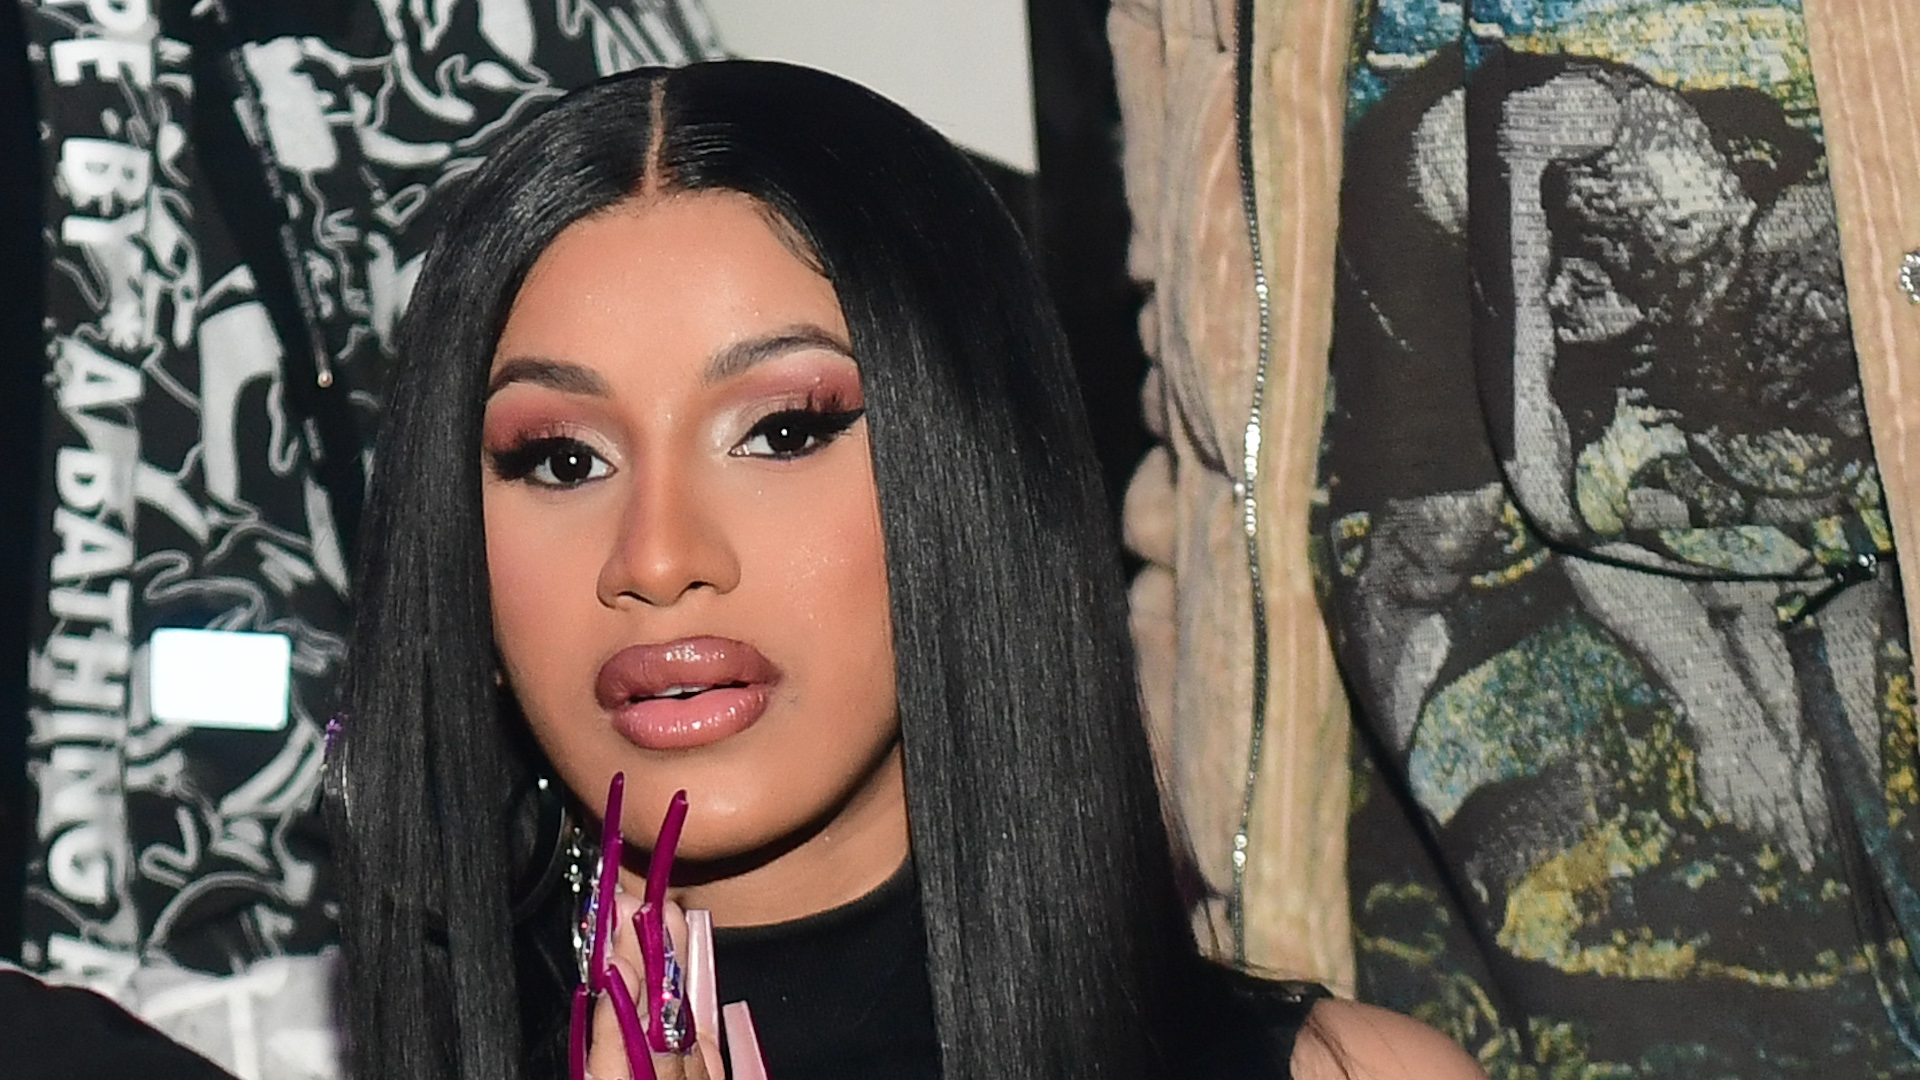 Cardi B Responds to Claims She Makes Music Designed to Go Viral on TikTok